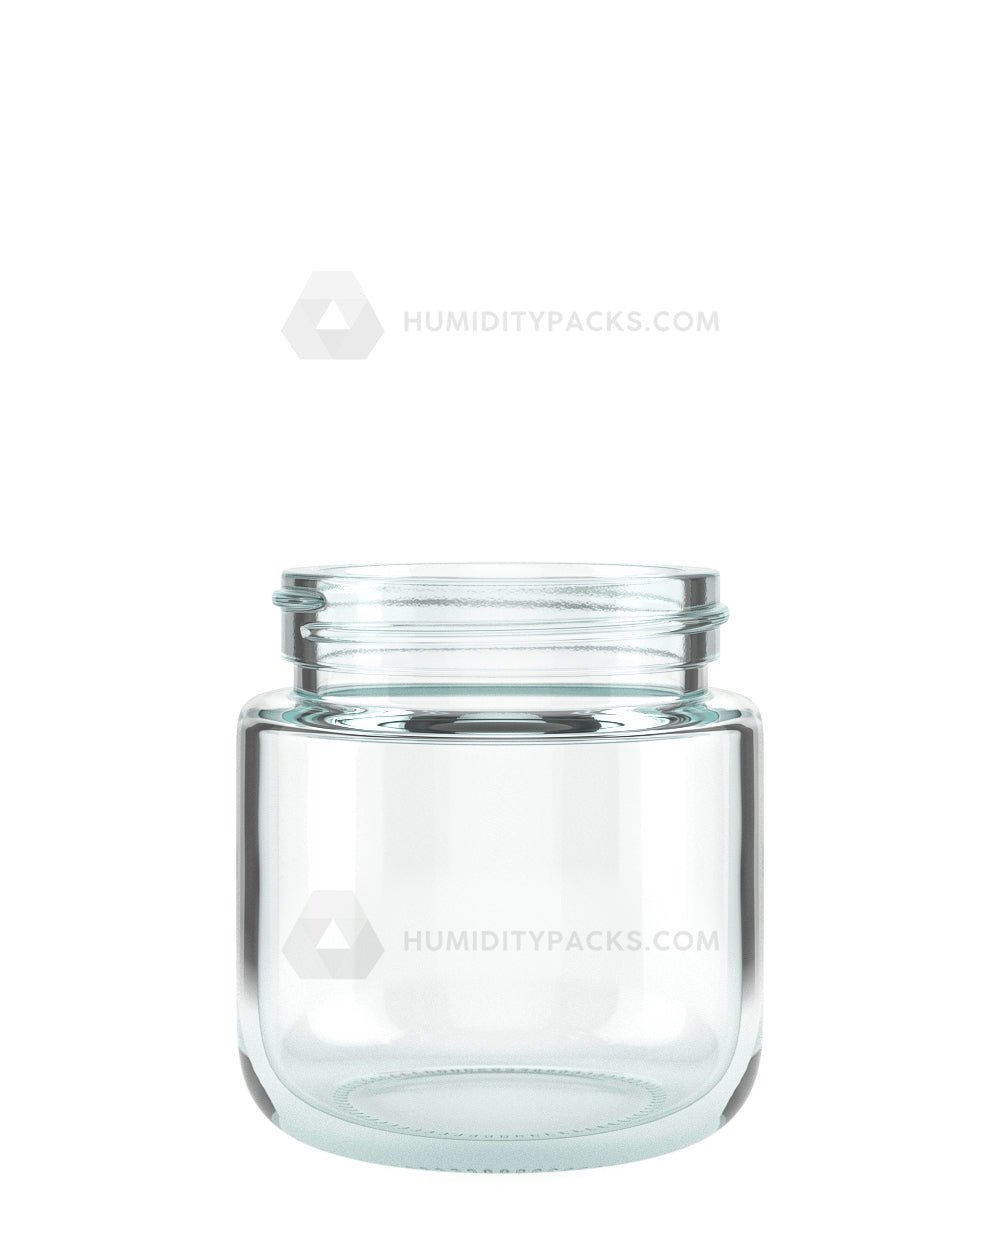 Acopa 72 oz. Clear Stackable Square Glass Jar